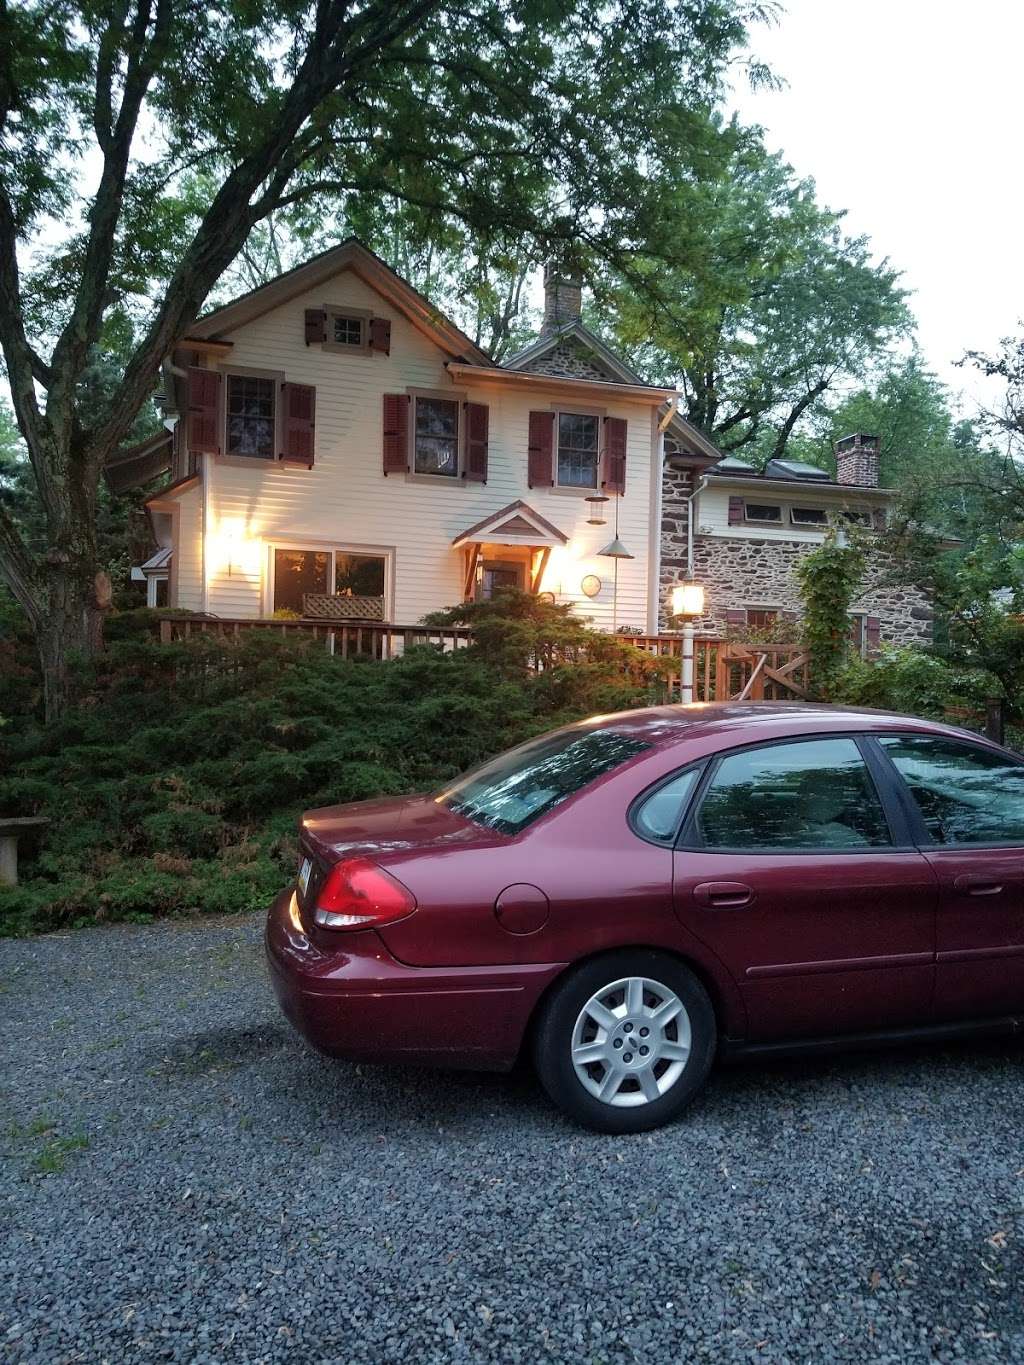 FROG HOLLOW FARM BED & BREAKFAST | 401 Frogtown Rd, Kintnersville, PA 18930, USA | Phone: (610) 847-3764